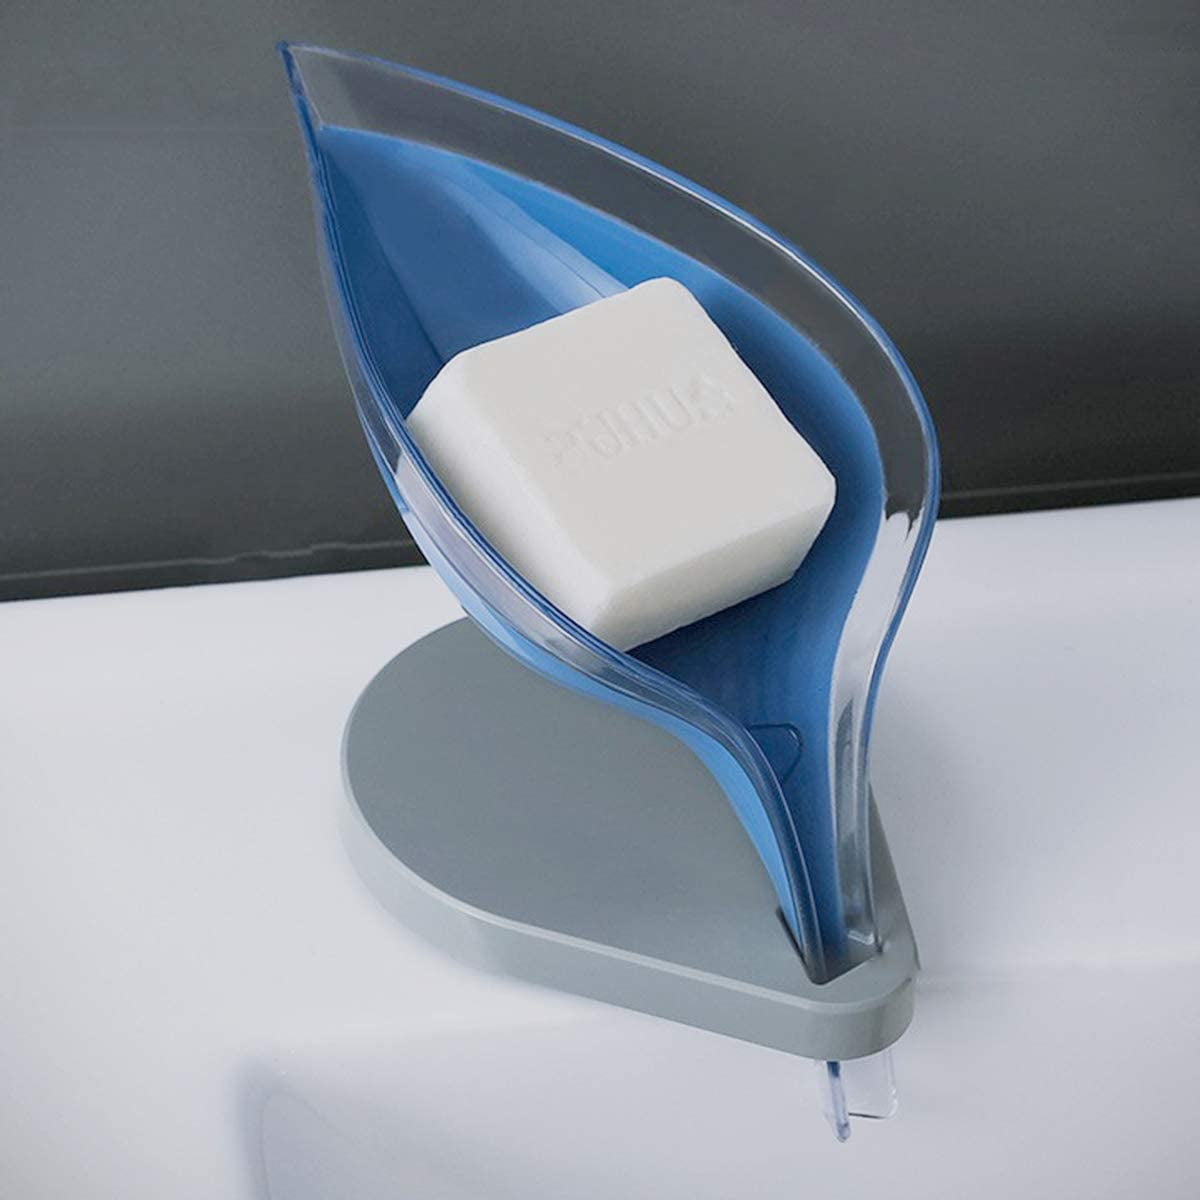 Leaf-Shape Soap Holder Self Draining Soap Dish Sponge Tray with Suction Cup . 